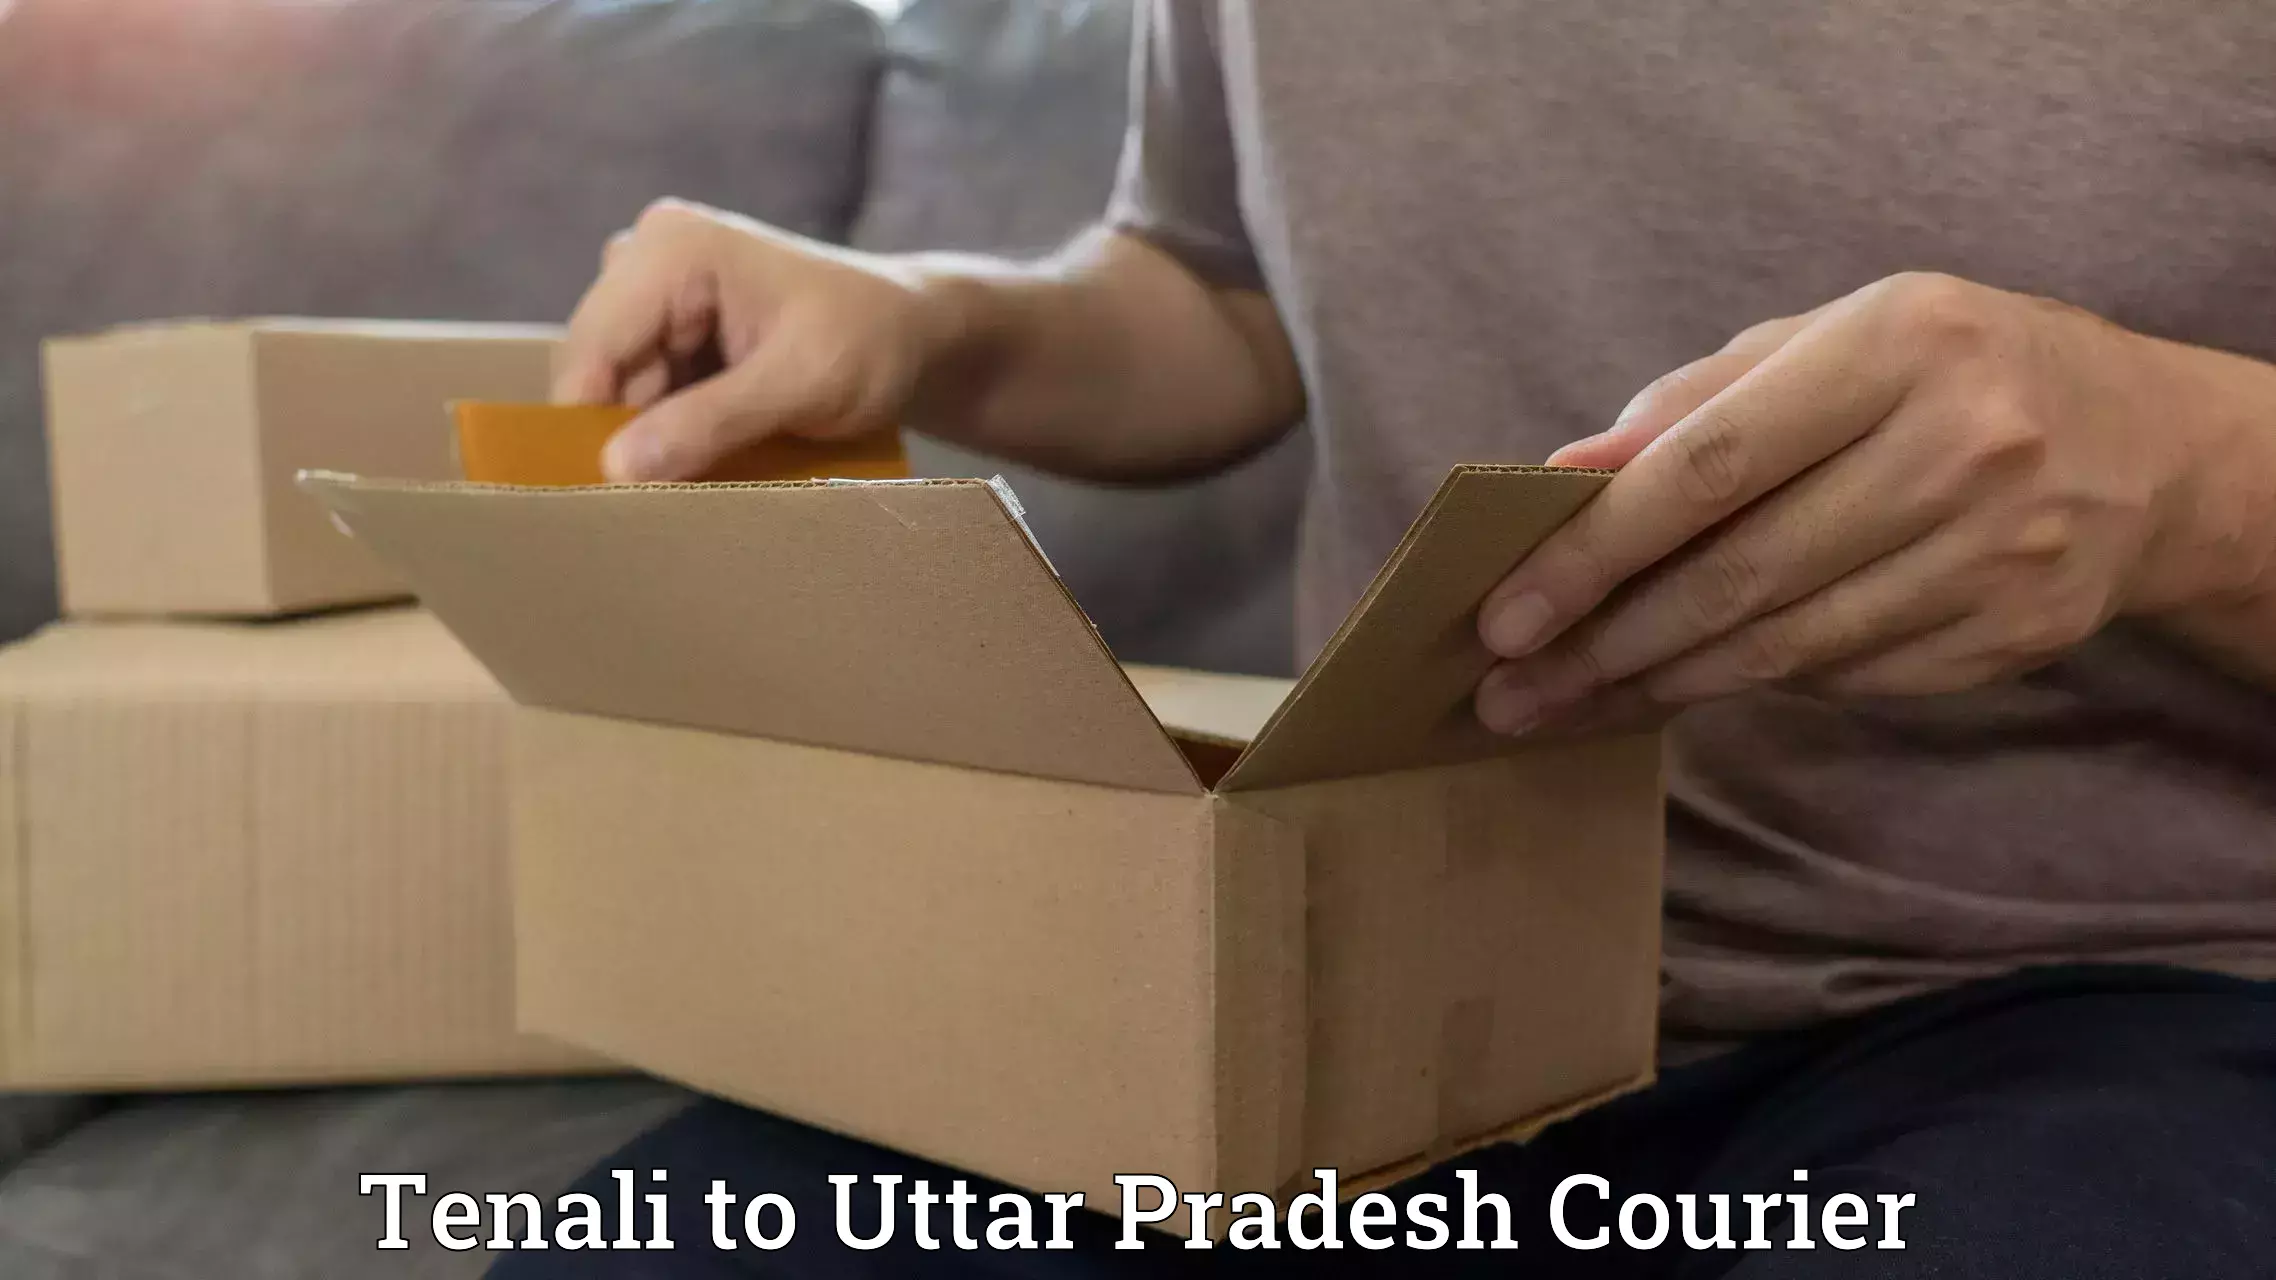 Professional courier handling Tenali to Lucknow